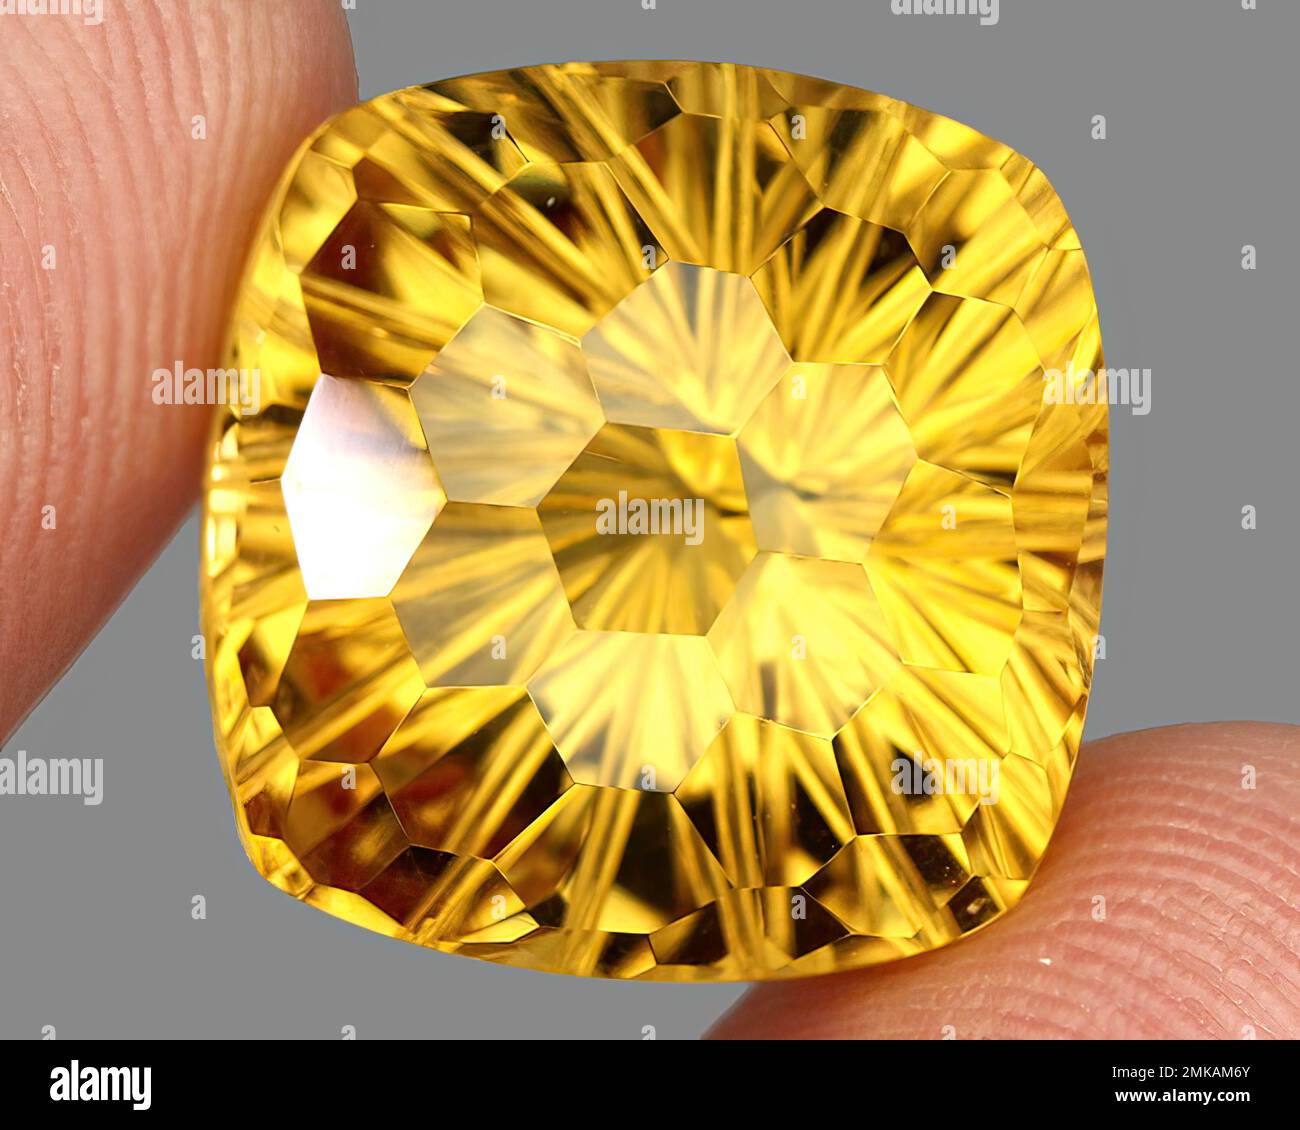 Natural gem yellow citrine on gray background Stock Photo